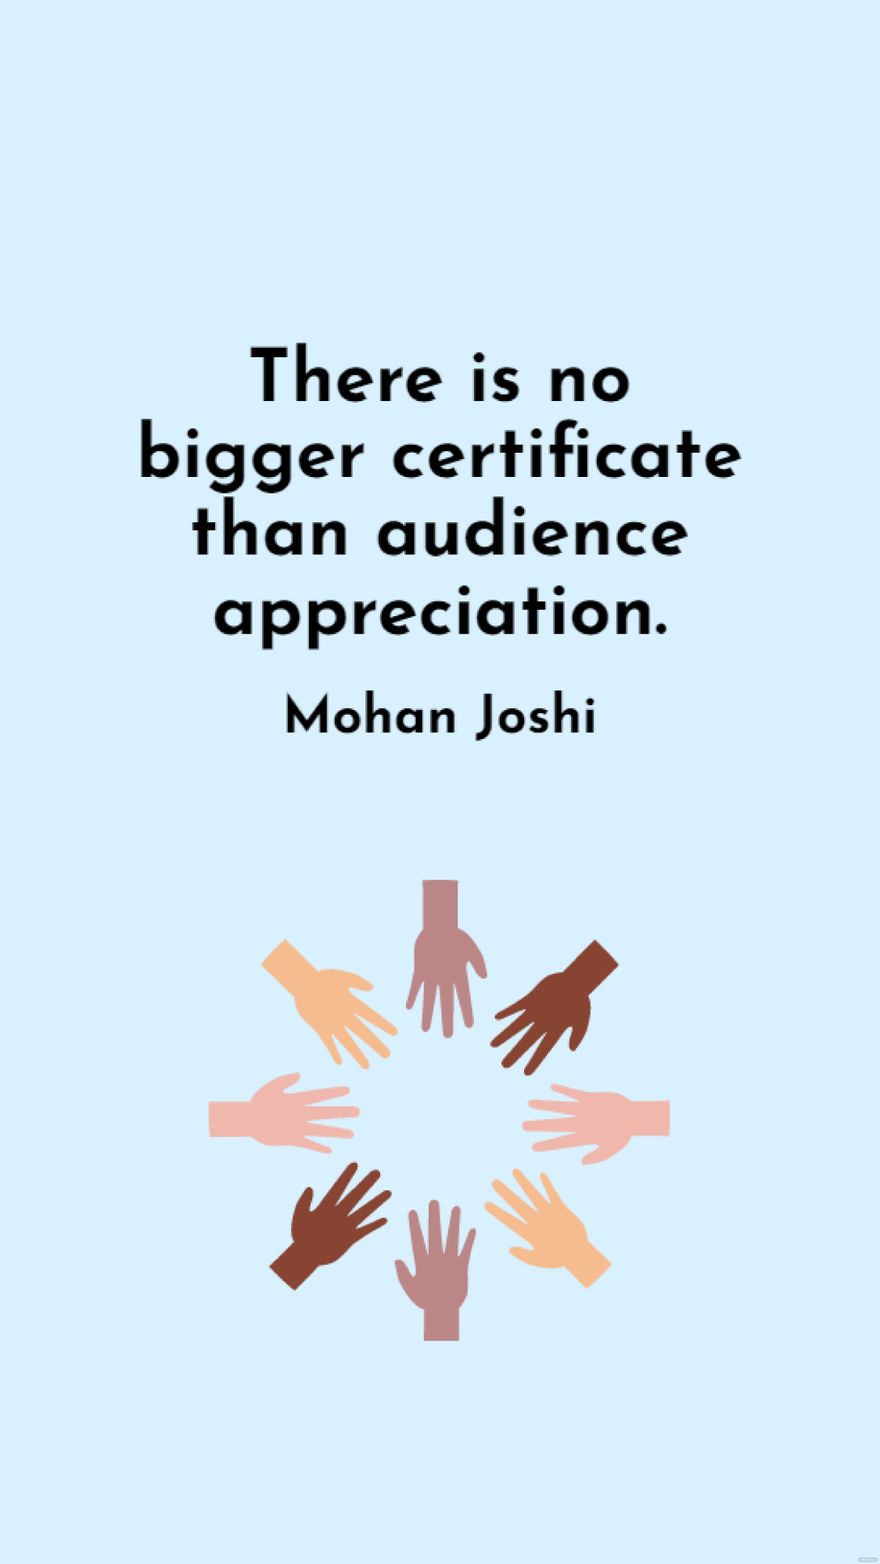 Mohan Joshi - There is no bigger certificate than audience appreciation. in JPG